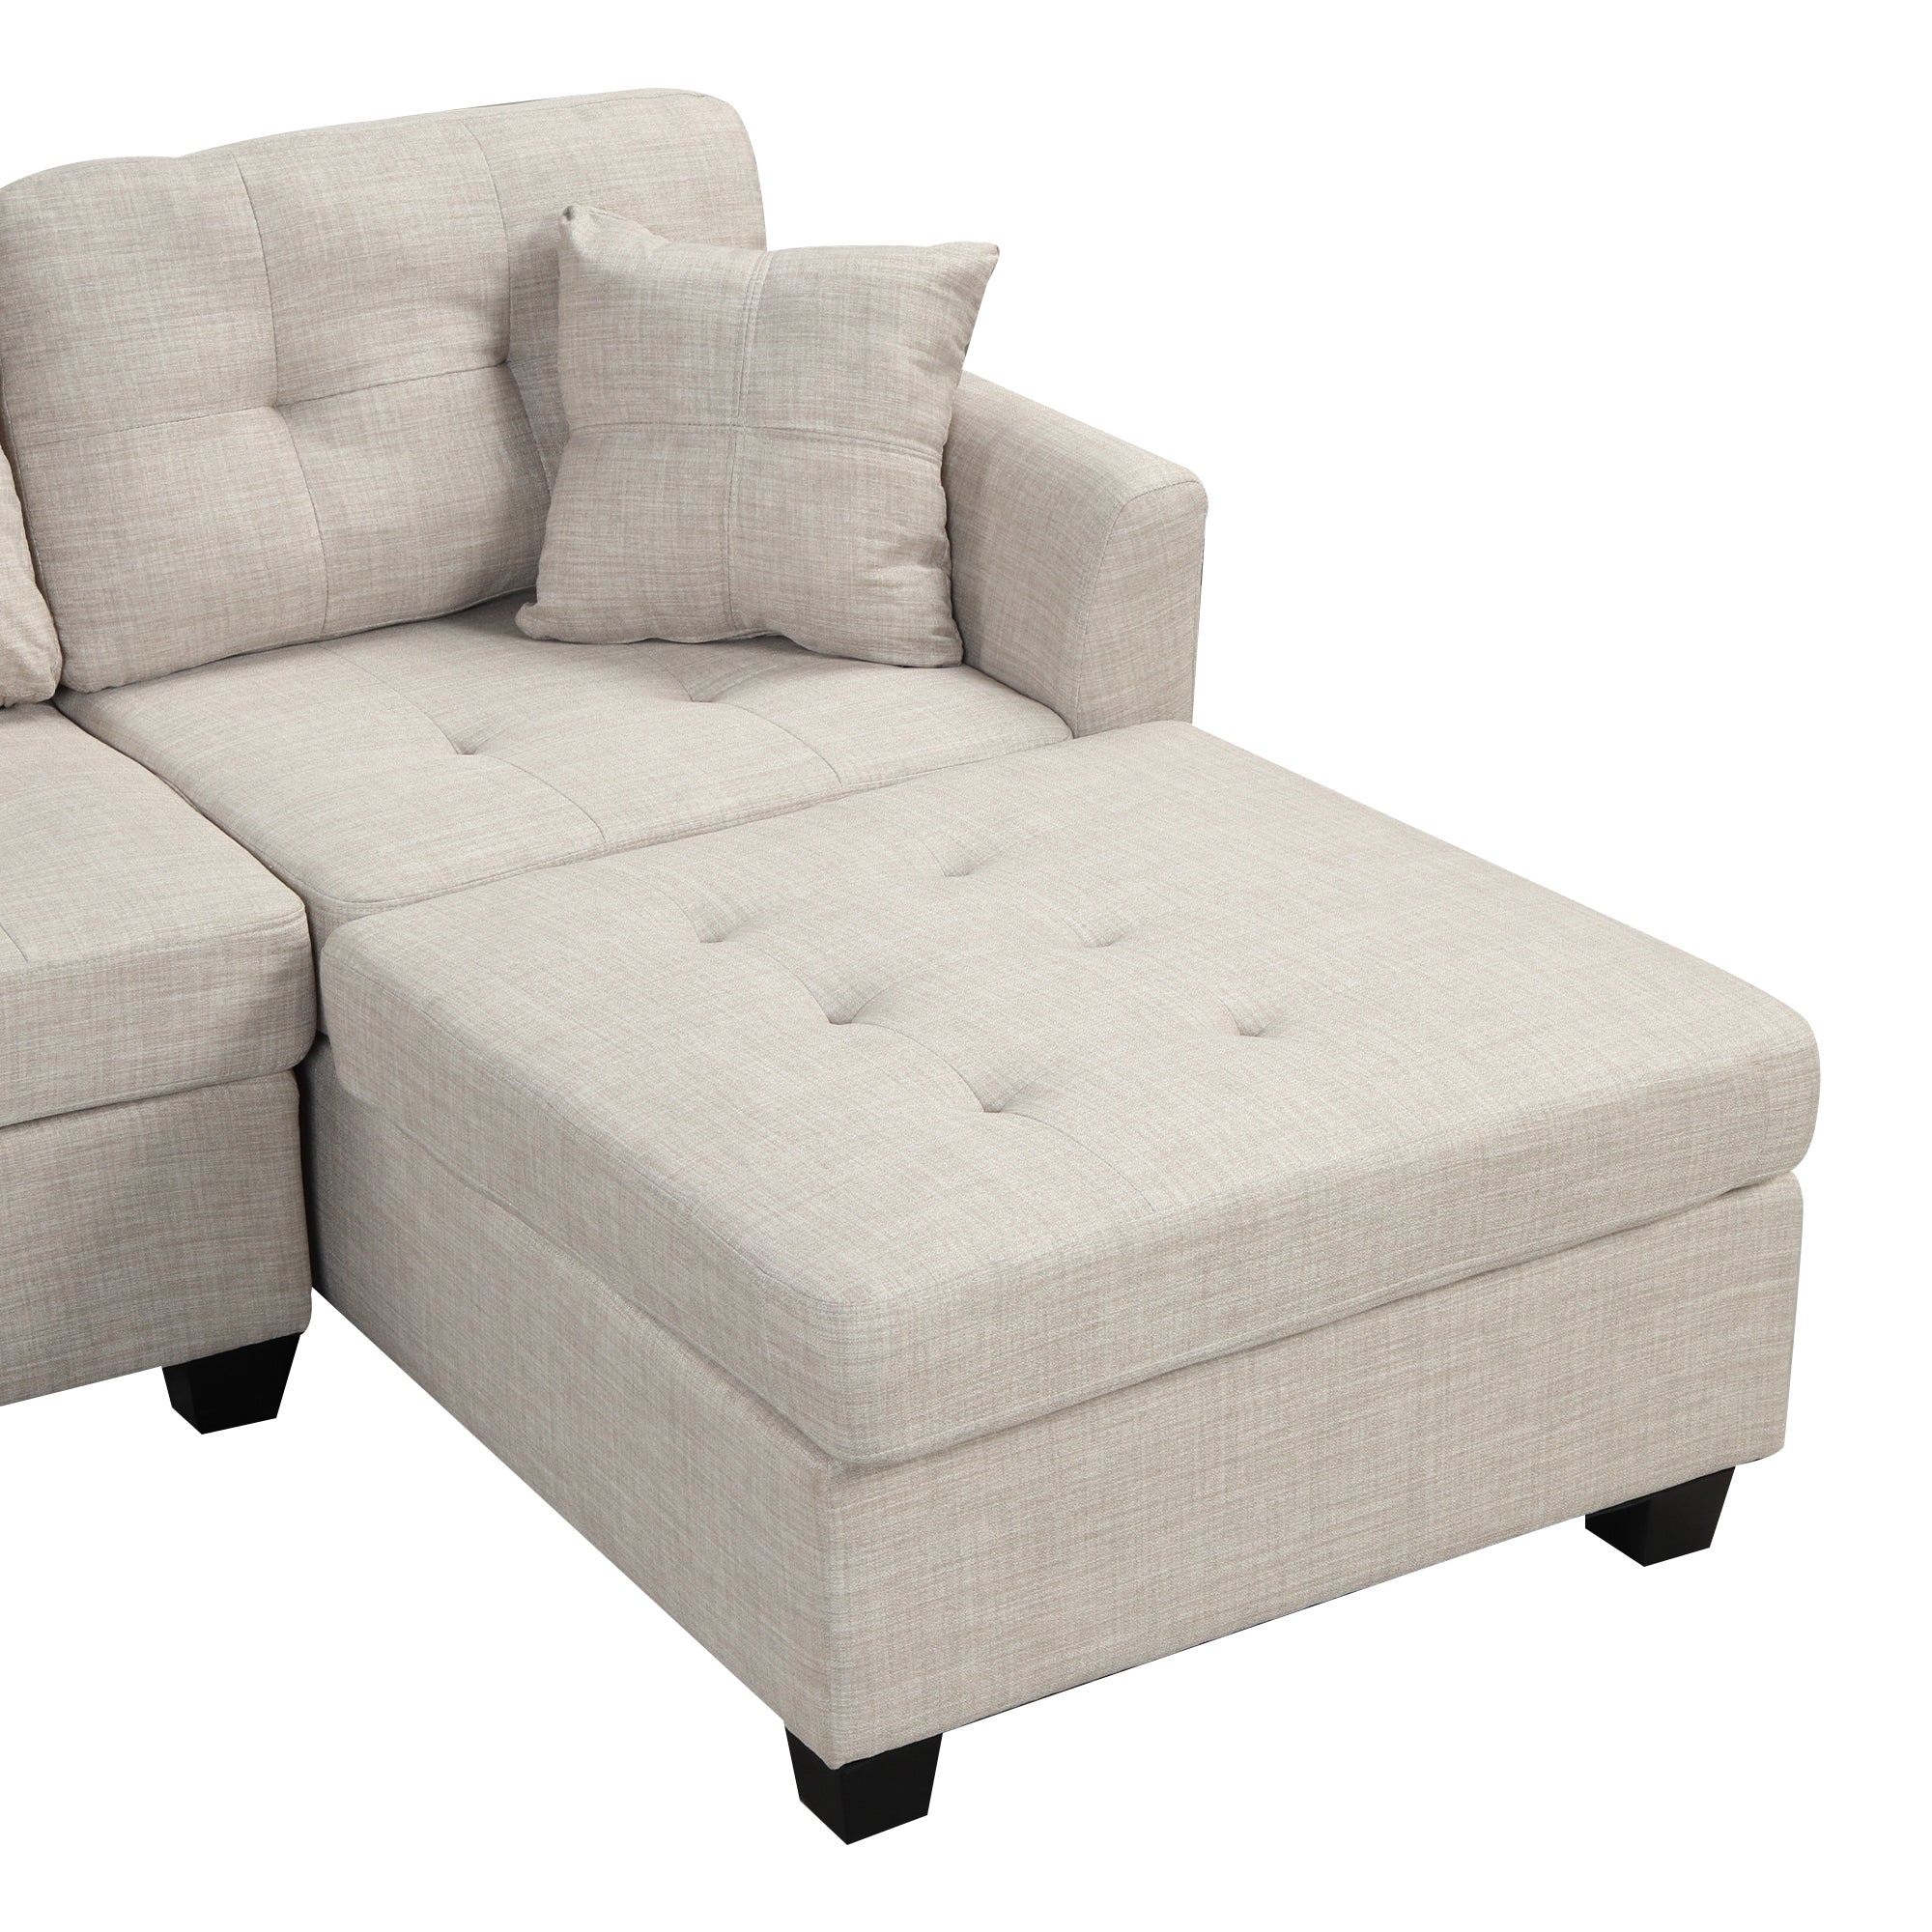 Oversized Beige U-Shaped Sectional w/ Storage-Stationary Sectionals-American Furniture Outlet